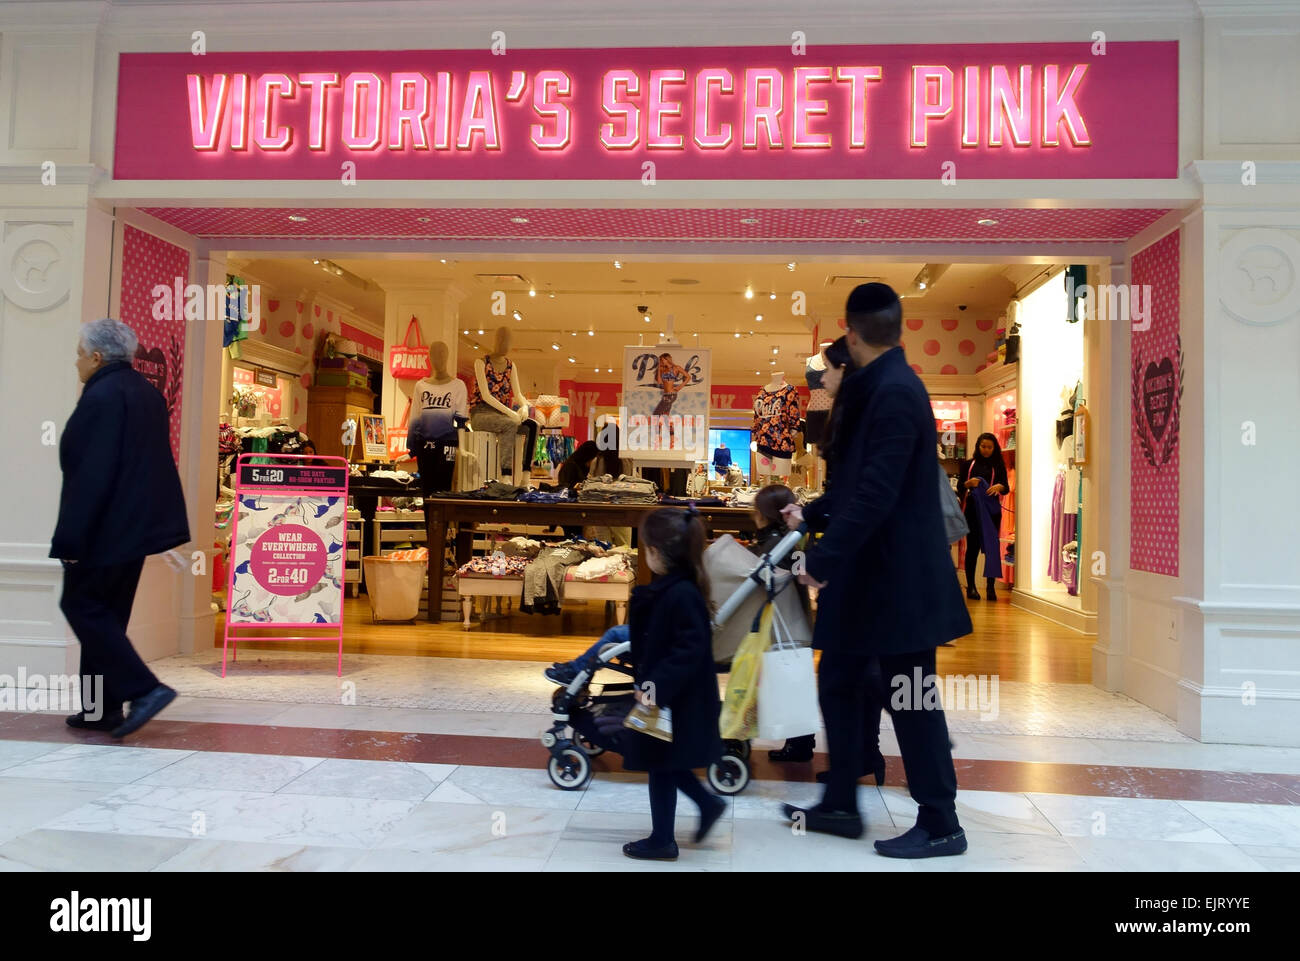 Victoria's Secret Pink casual wear and accessories store, London Stock Photo